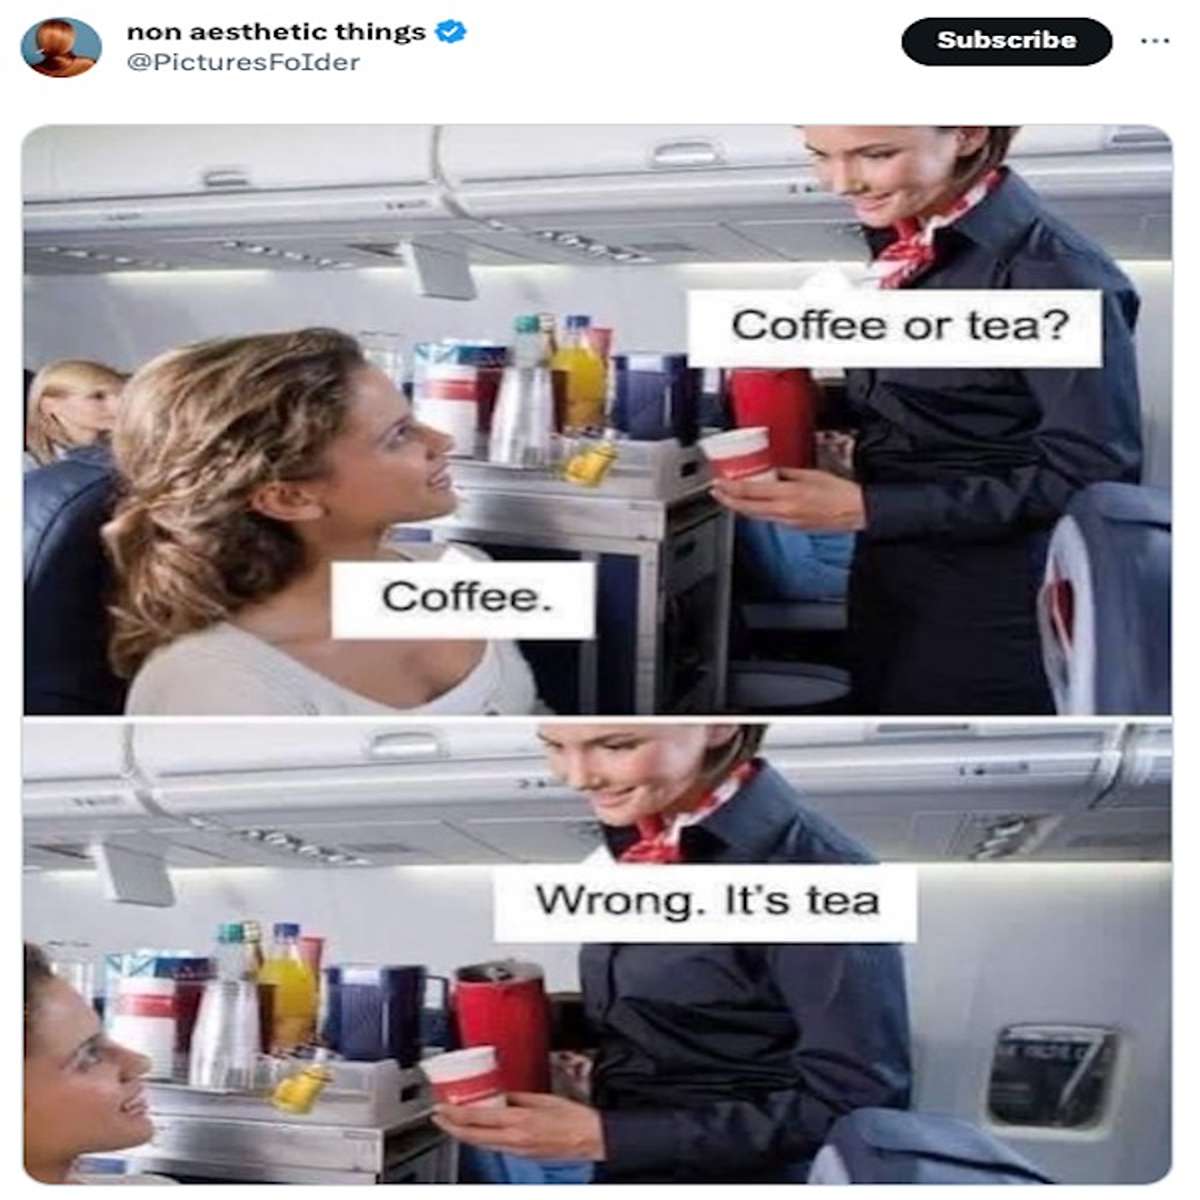 funny tweets and memes - non aesthetic things FoIder Coffee. Subscribe Coffee or tea? Wrong. It's tea